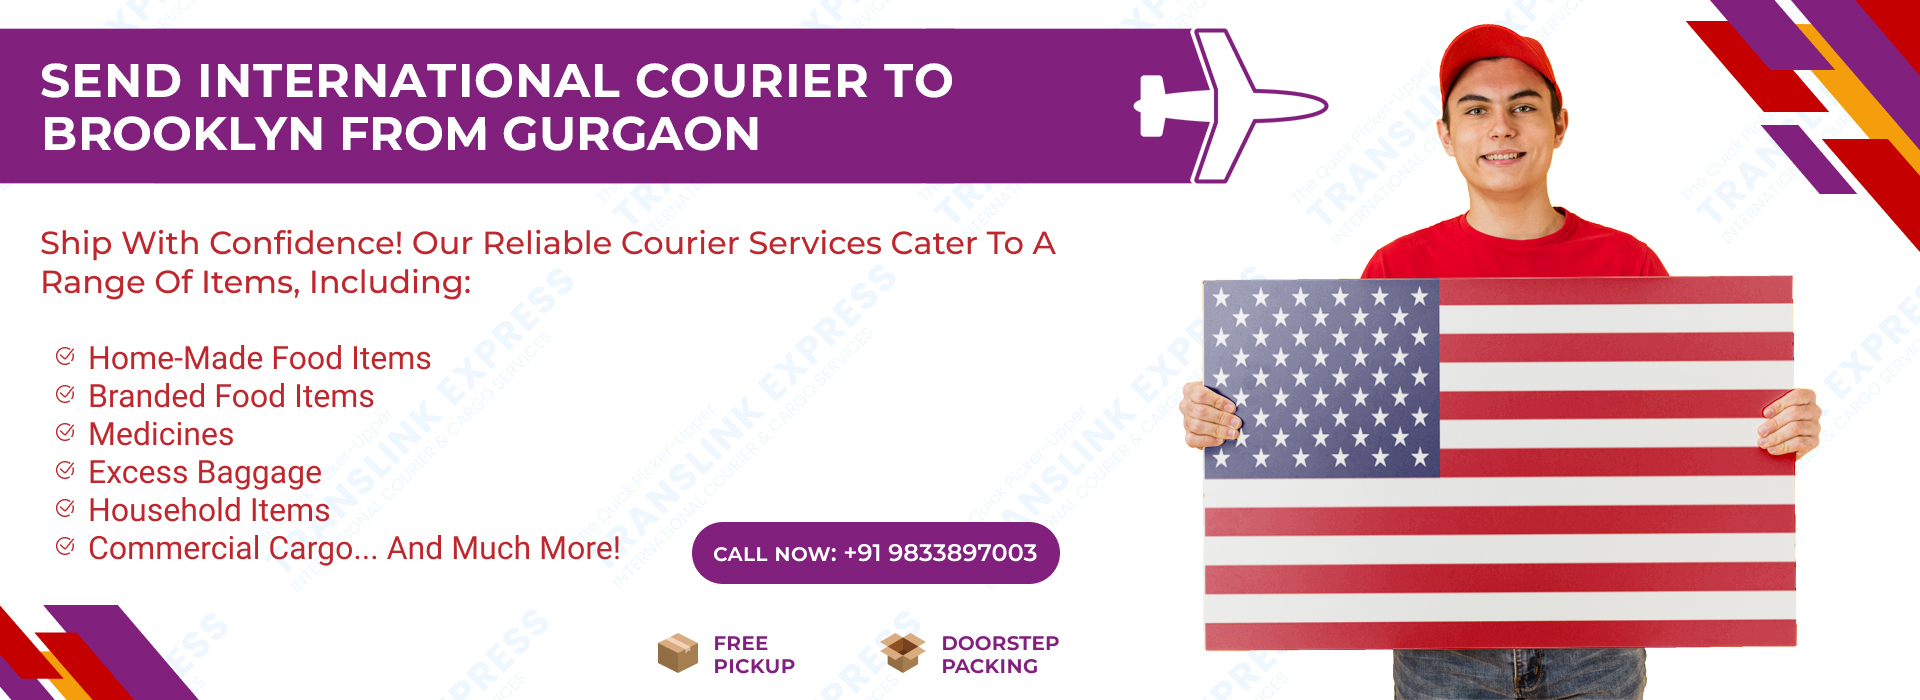 Courier to Brooklyn From Gurgaon